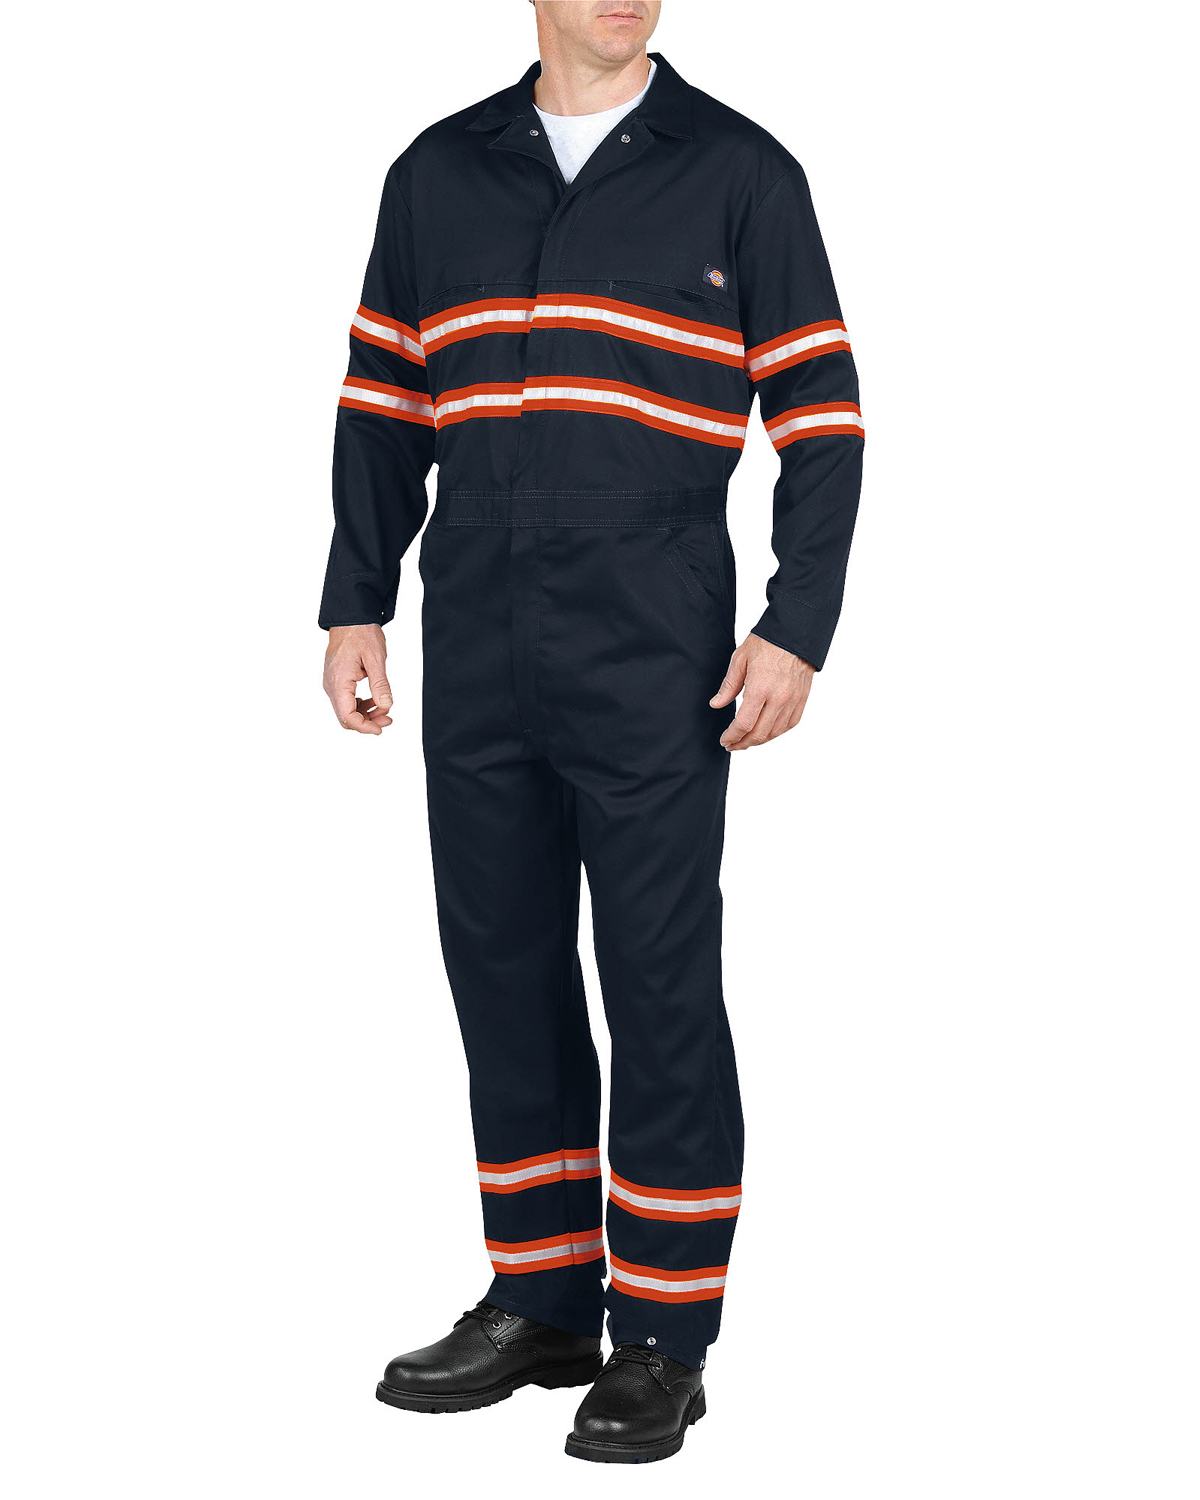 VV601 Dickies Men\'s Enhanced Visibility Long-Sleeve Coverall